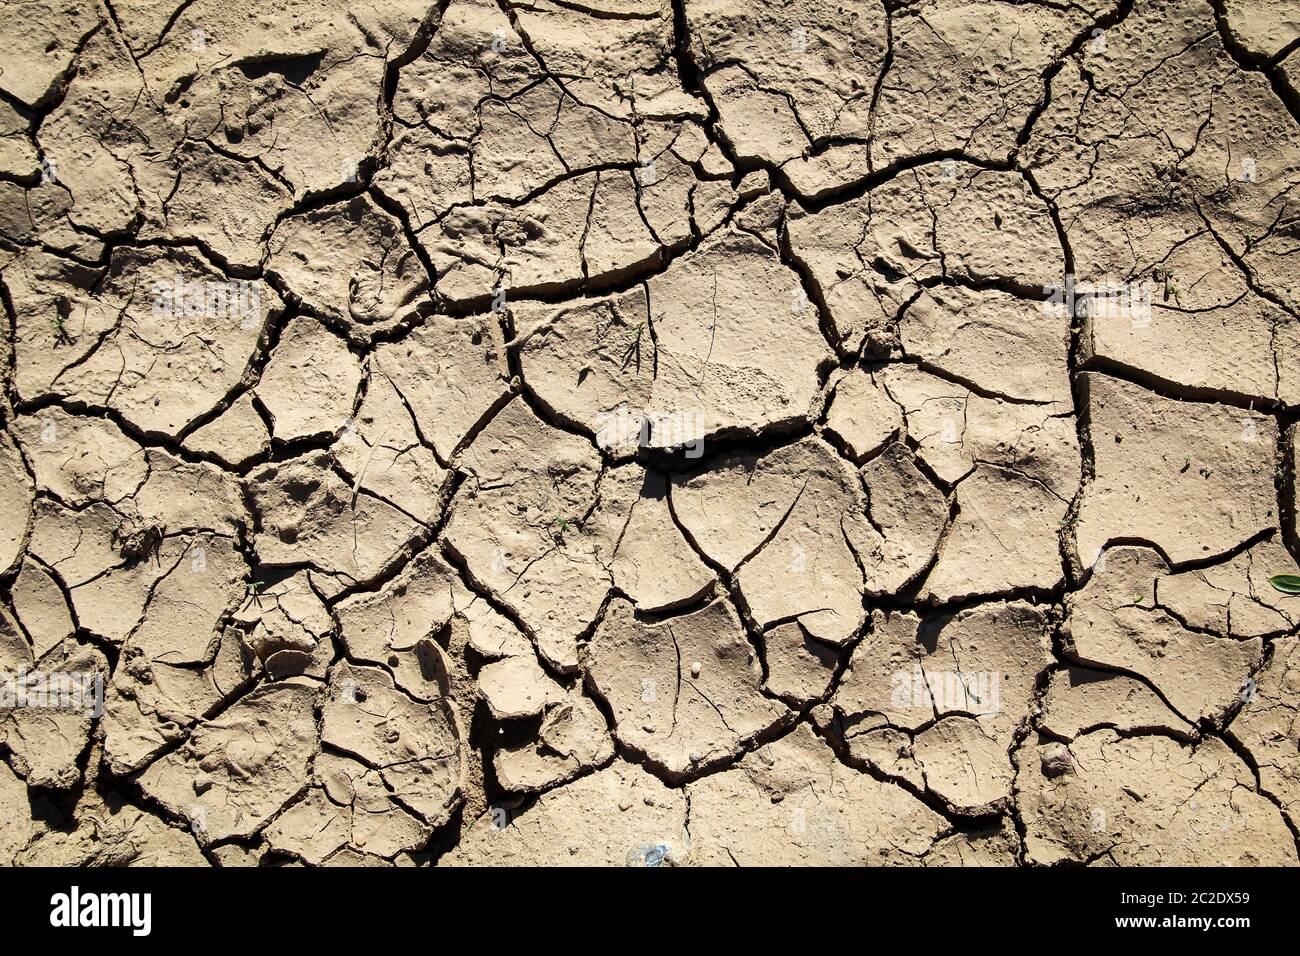 due to lack of rain, the earth dried up with cracks, climate change Stock Photo